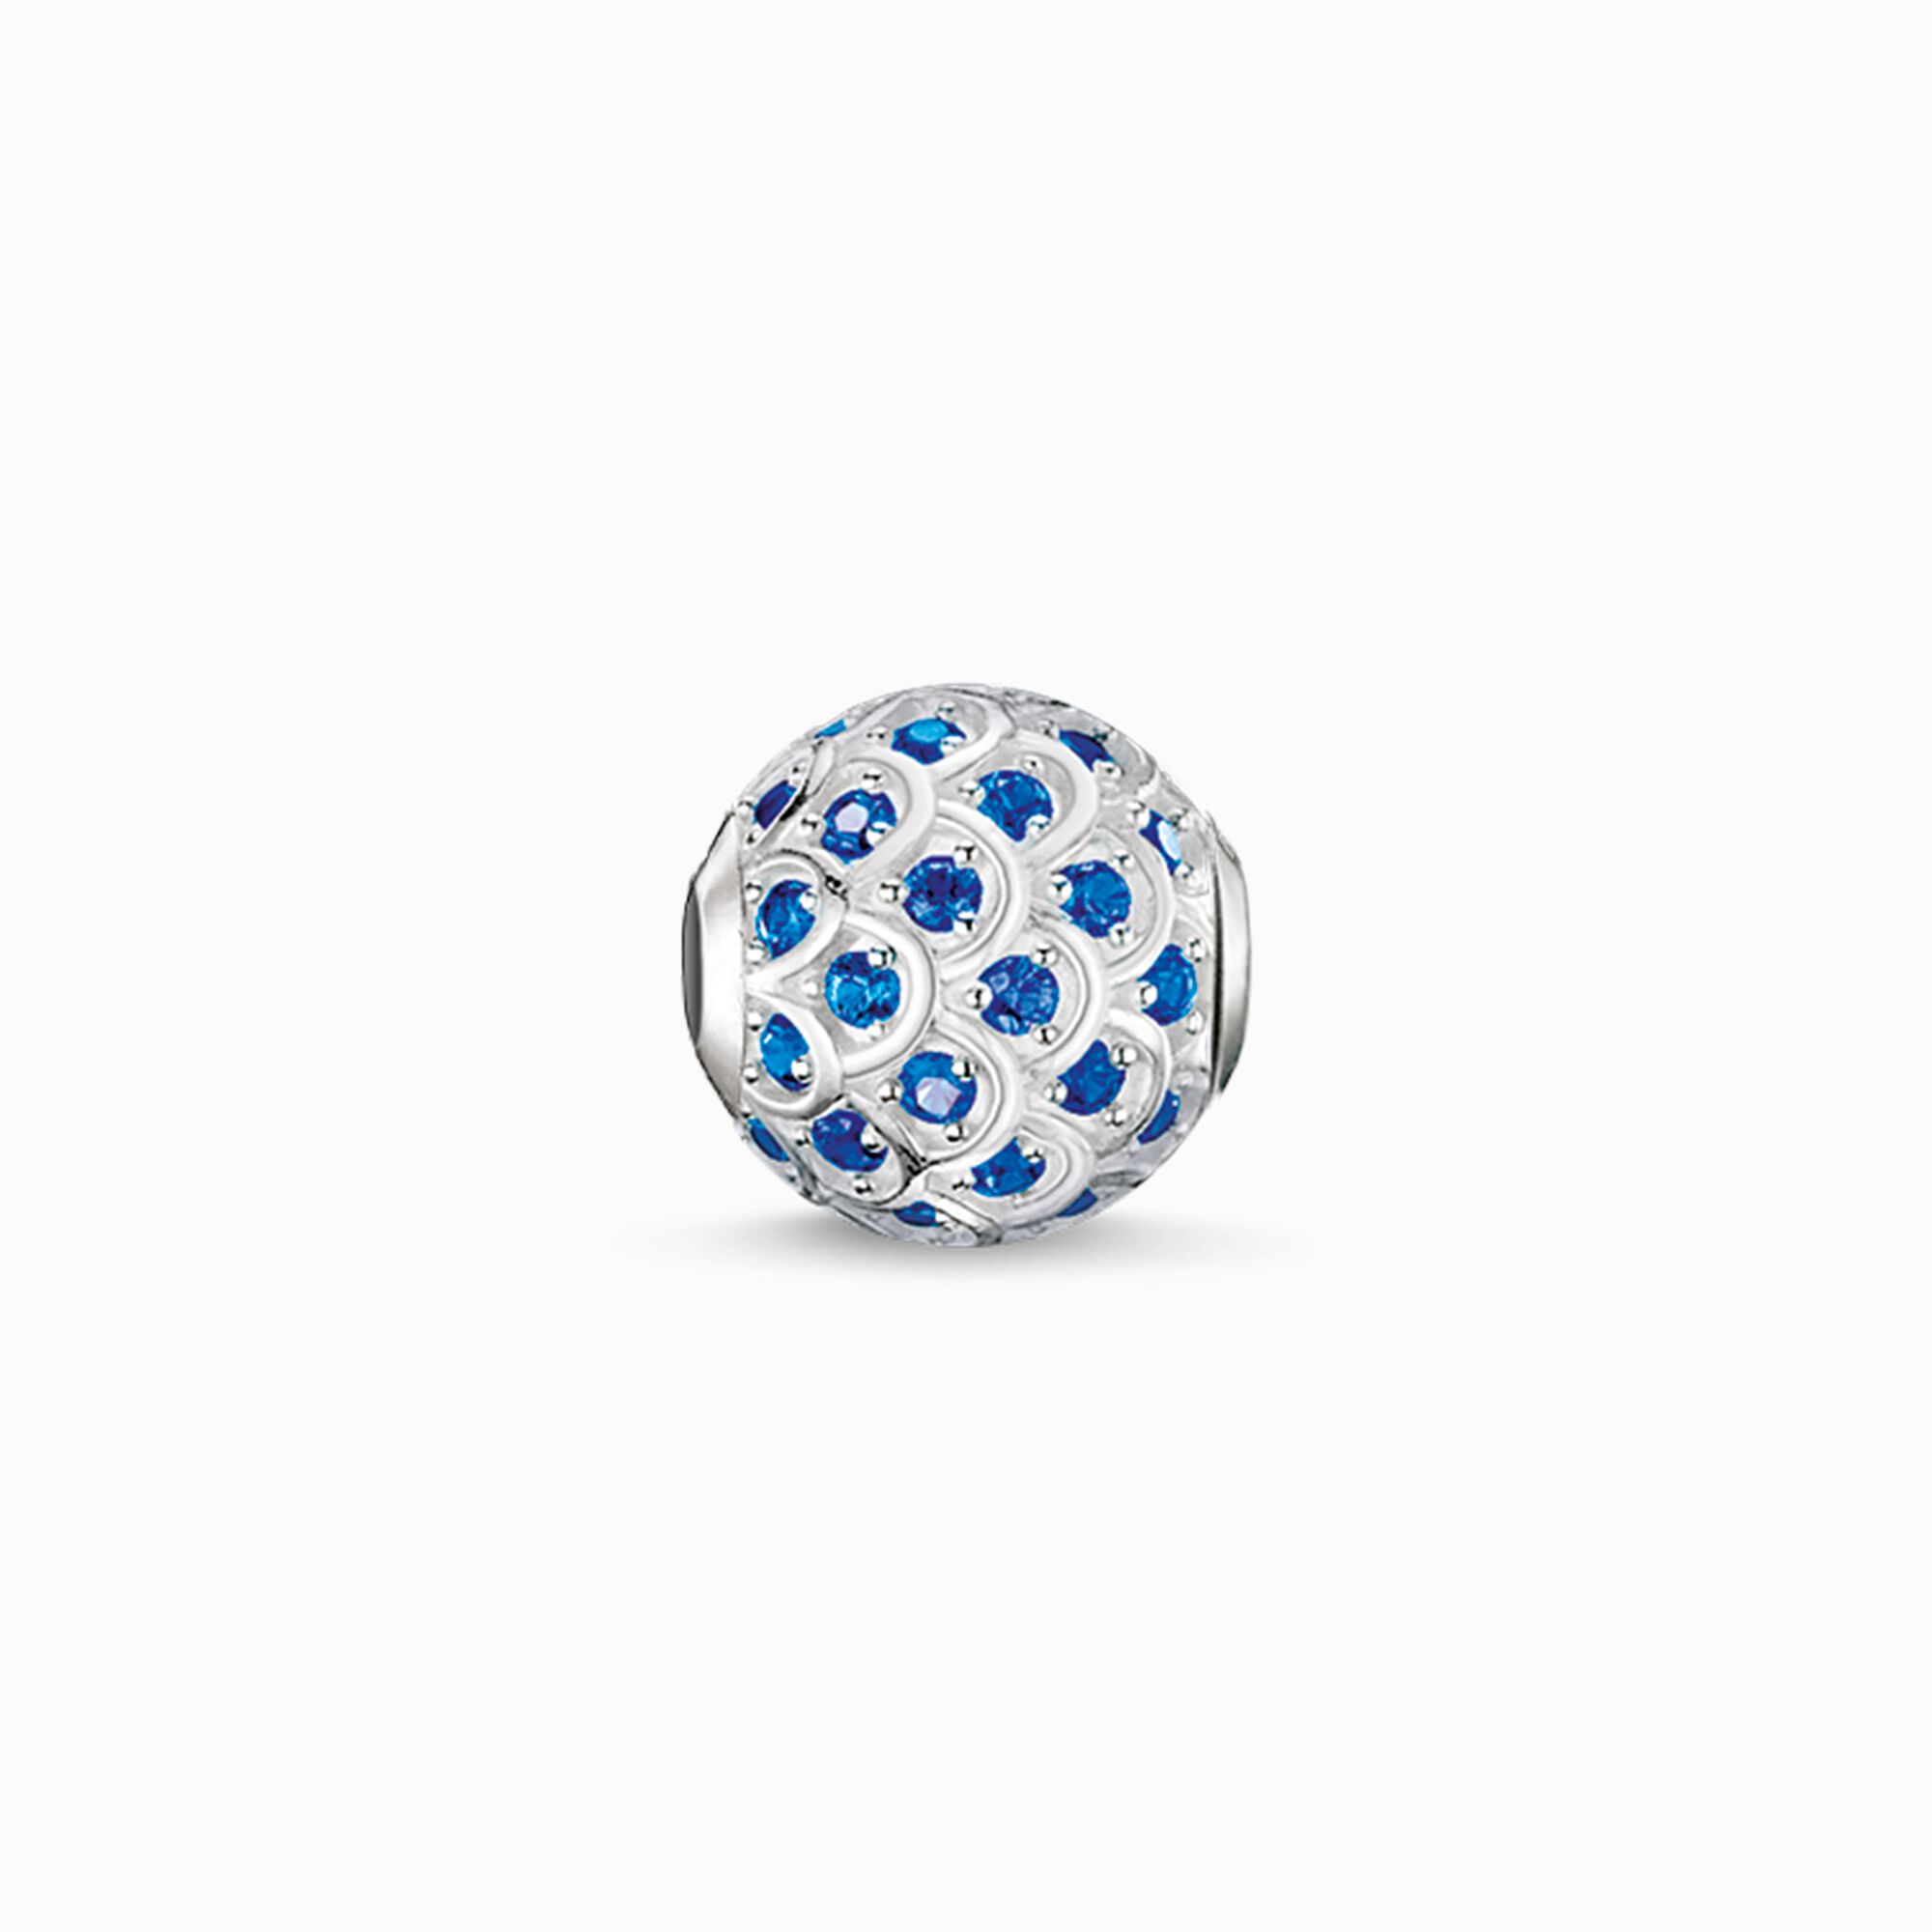 Bead blue fish from the Karma Beads collection in the THOMAS SABO online store